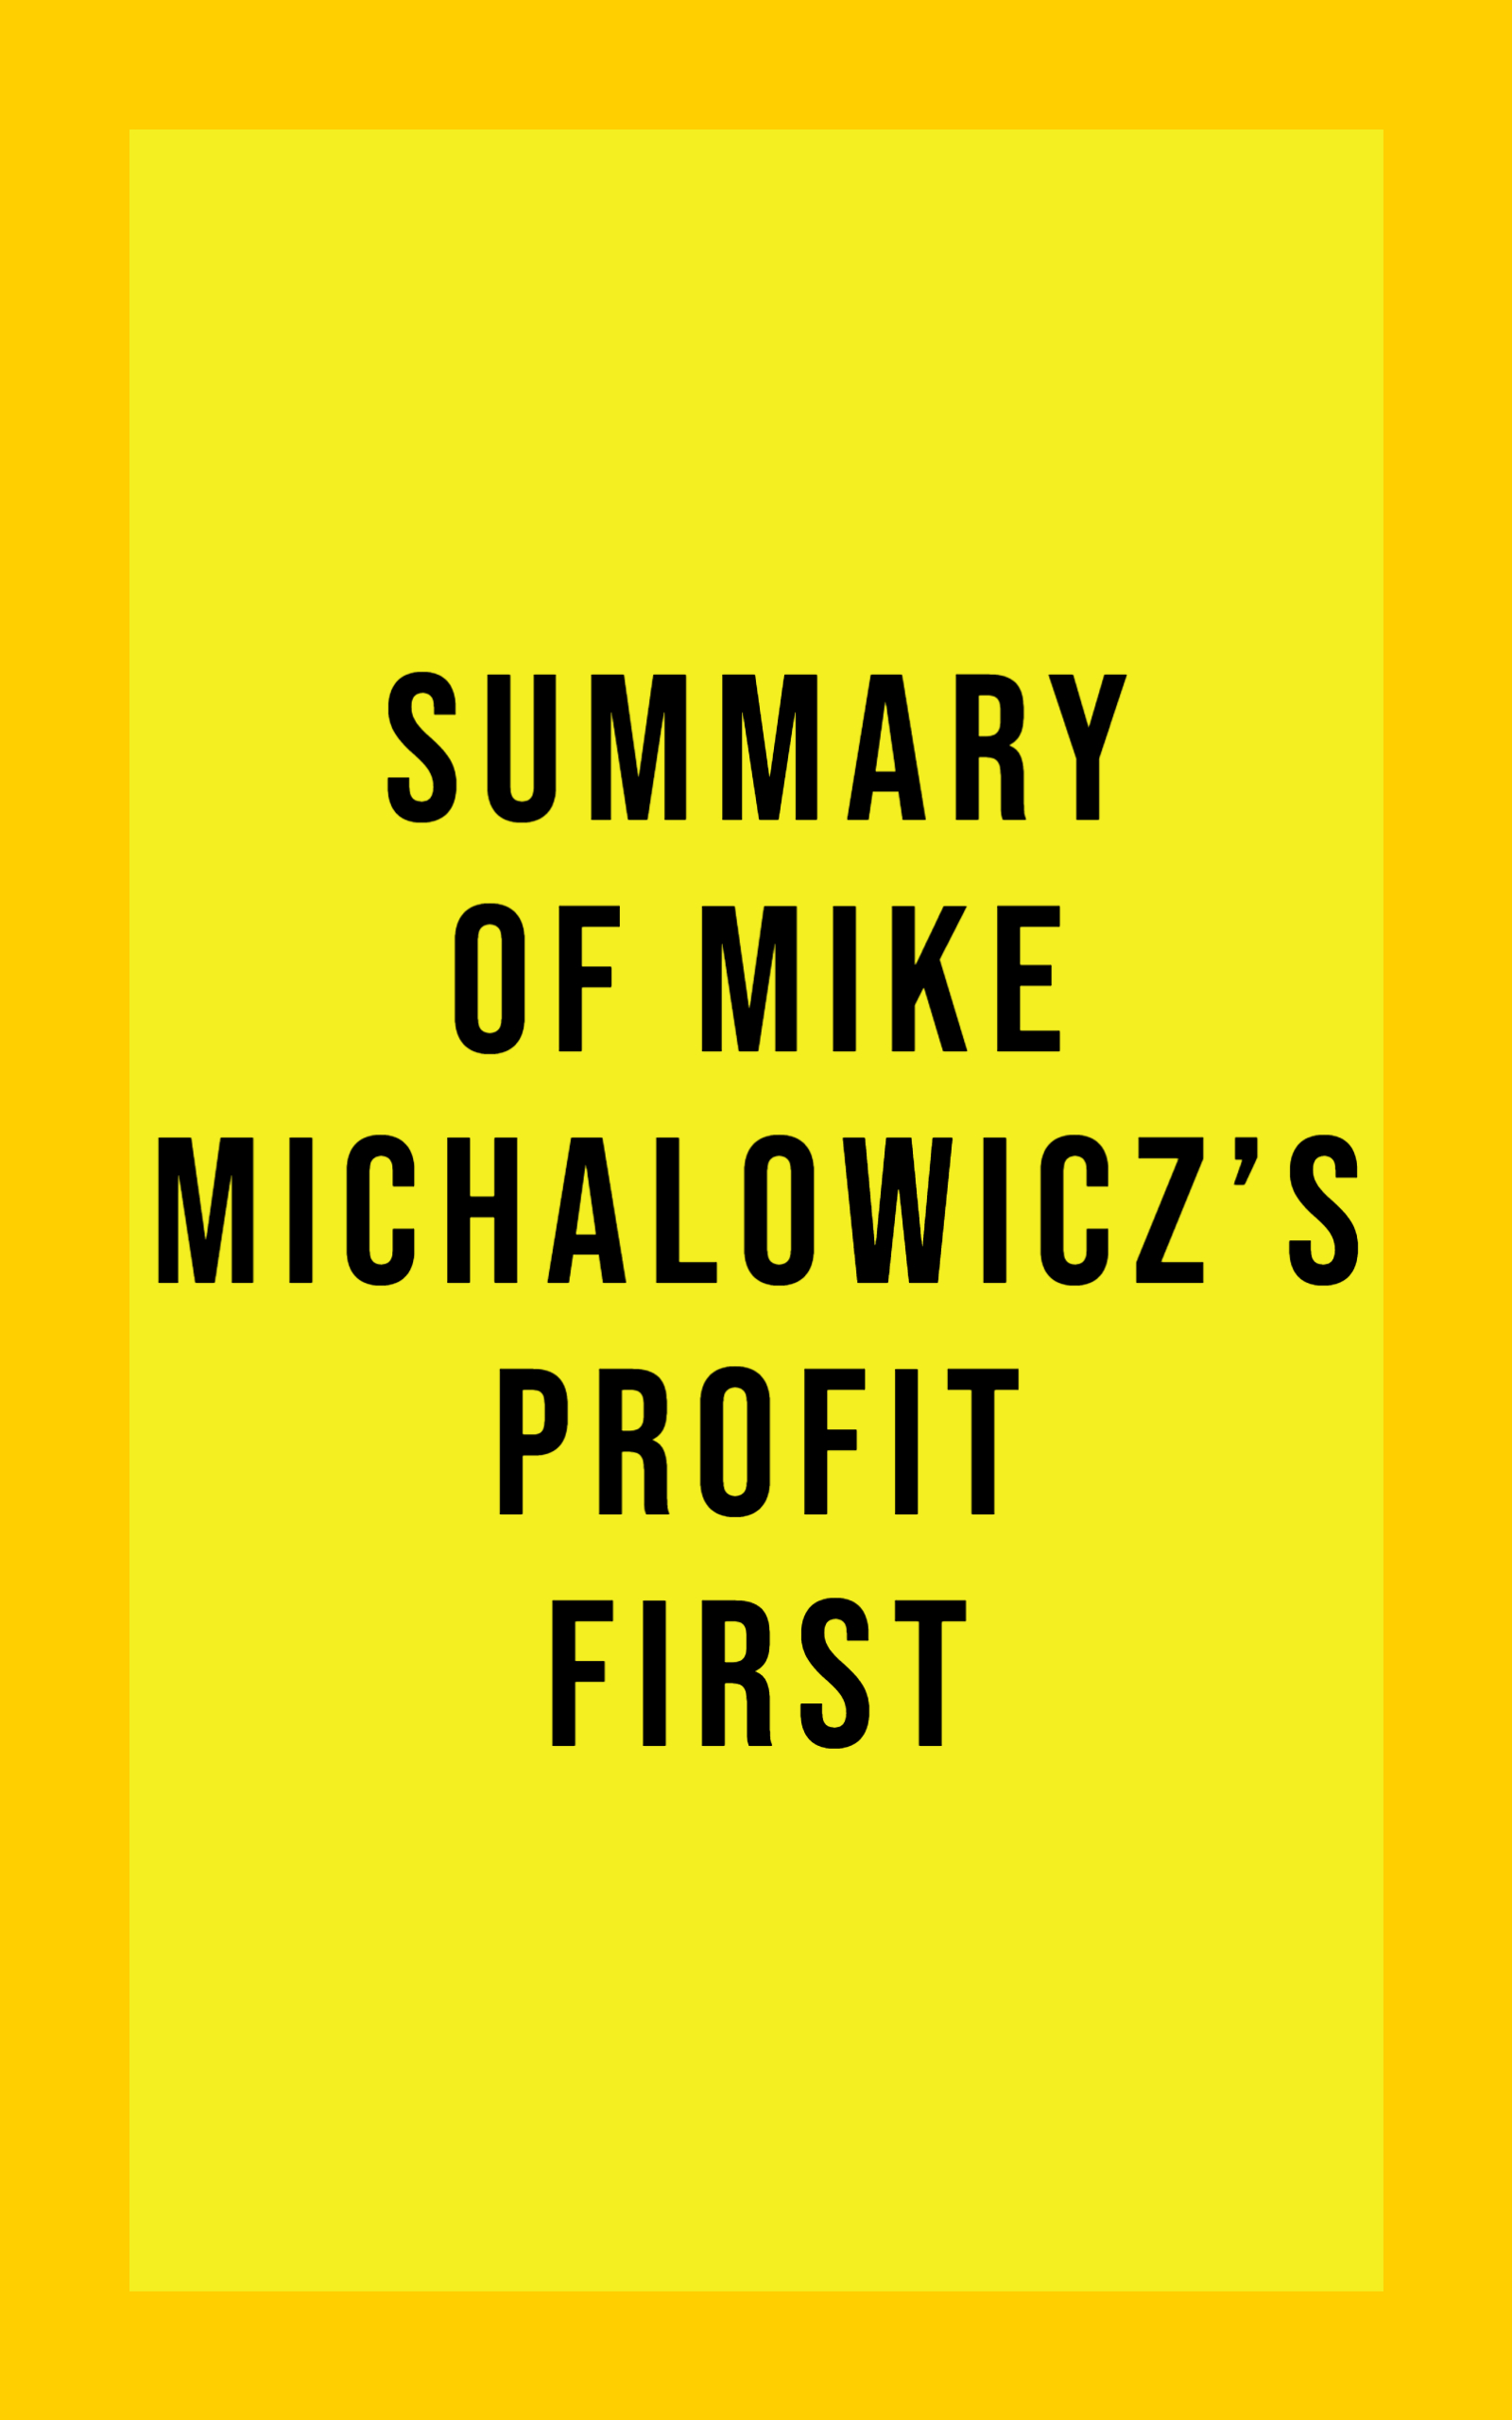 Summary of Mike Michalowicz's Profit First